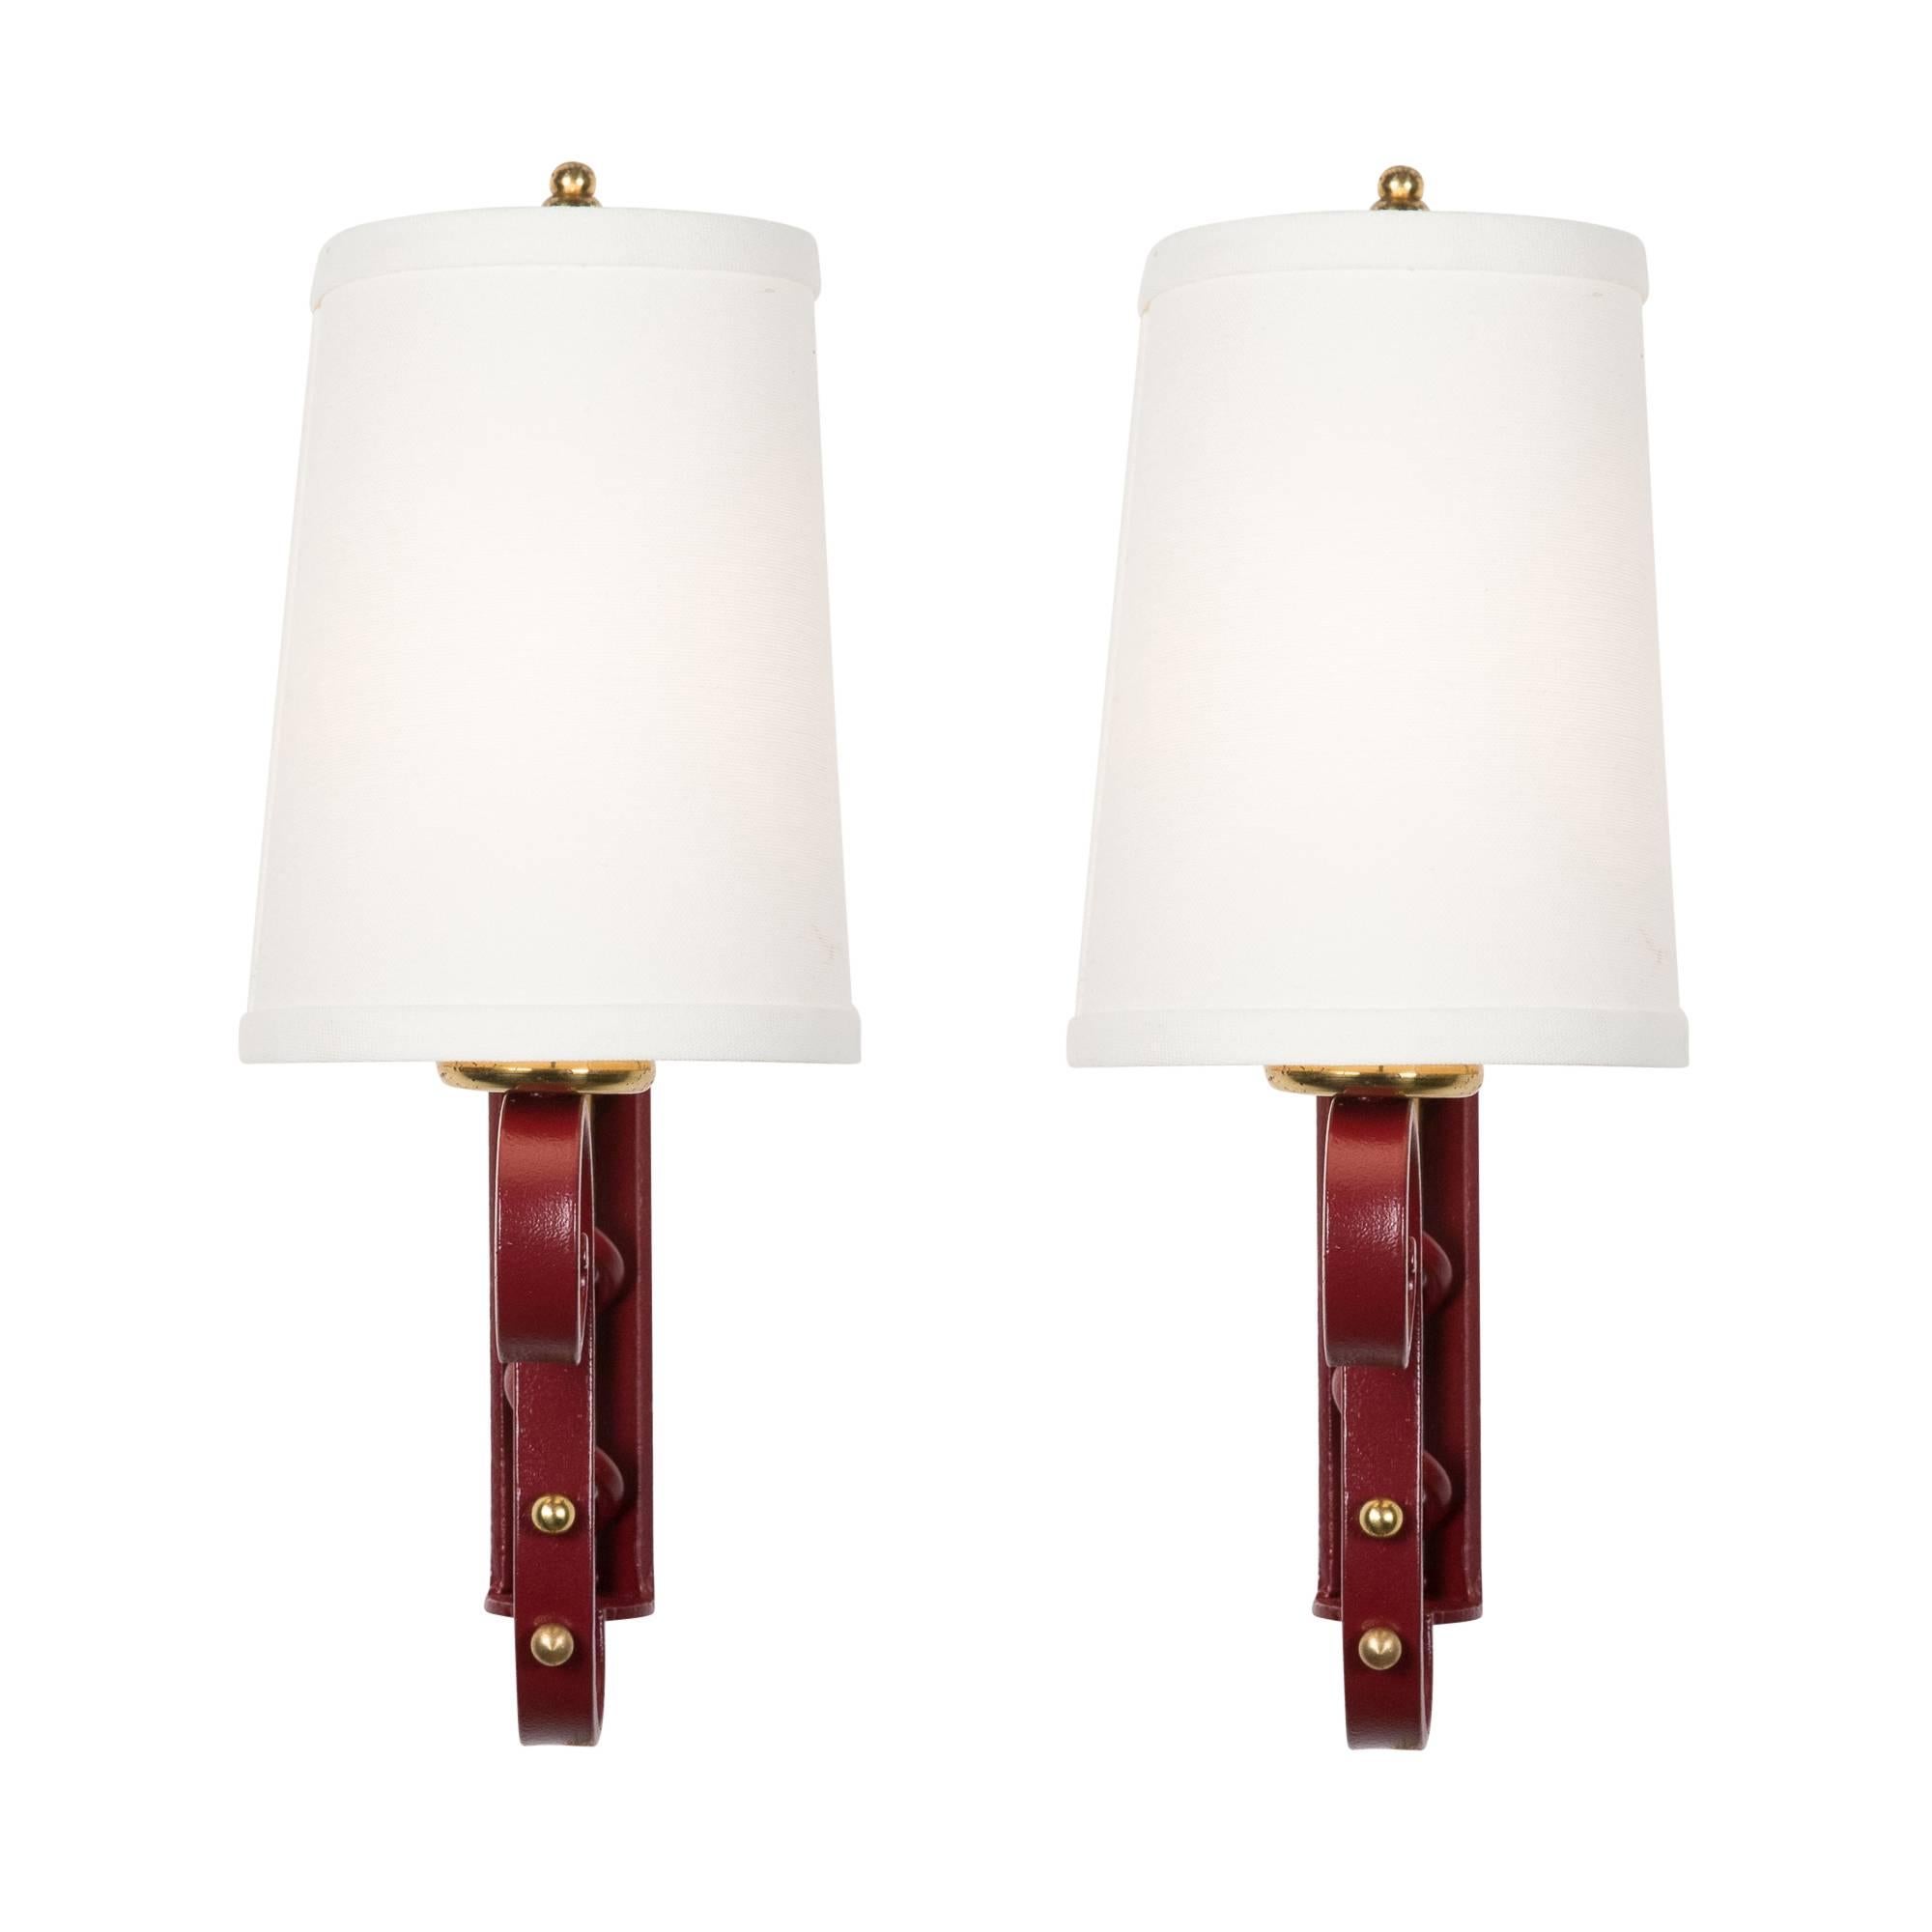 Pair of Red Lacquered Iron Sconces, French, 1950s For Sale